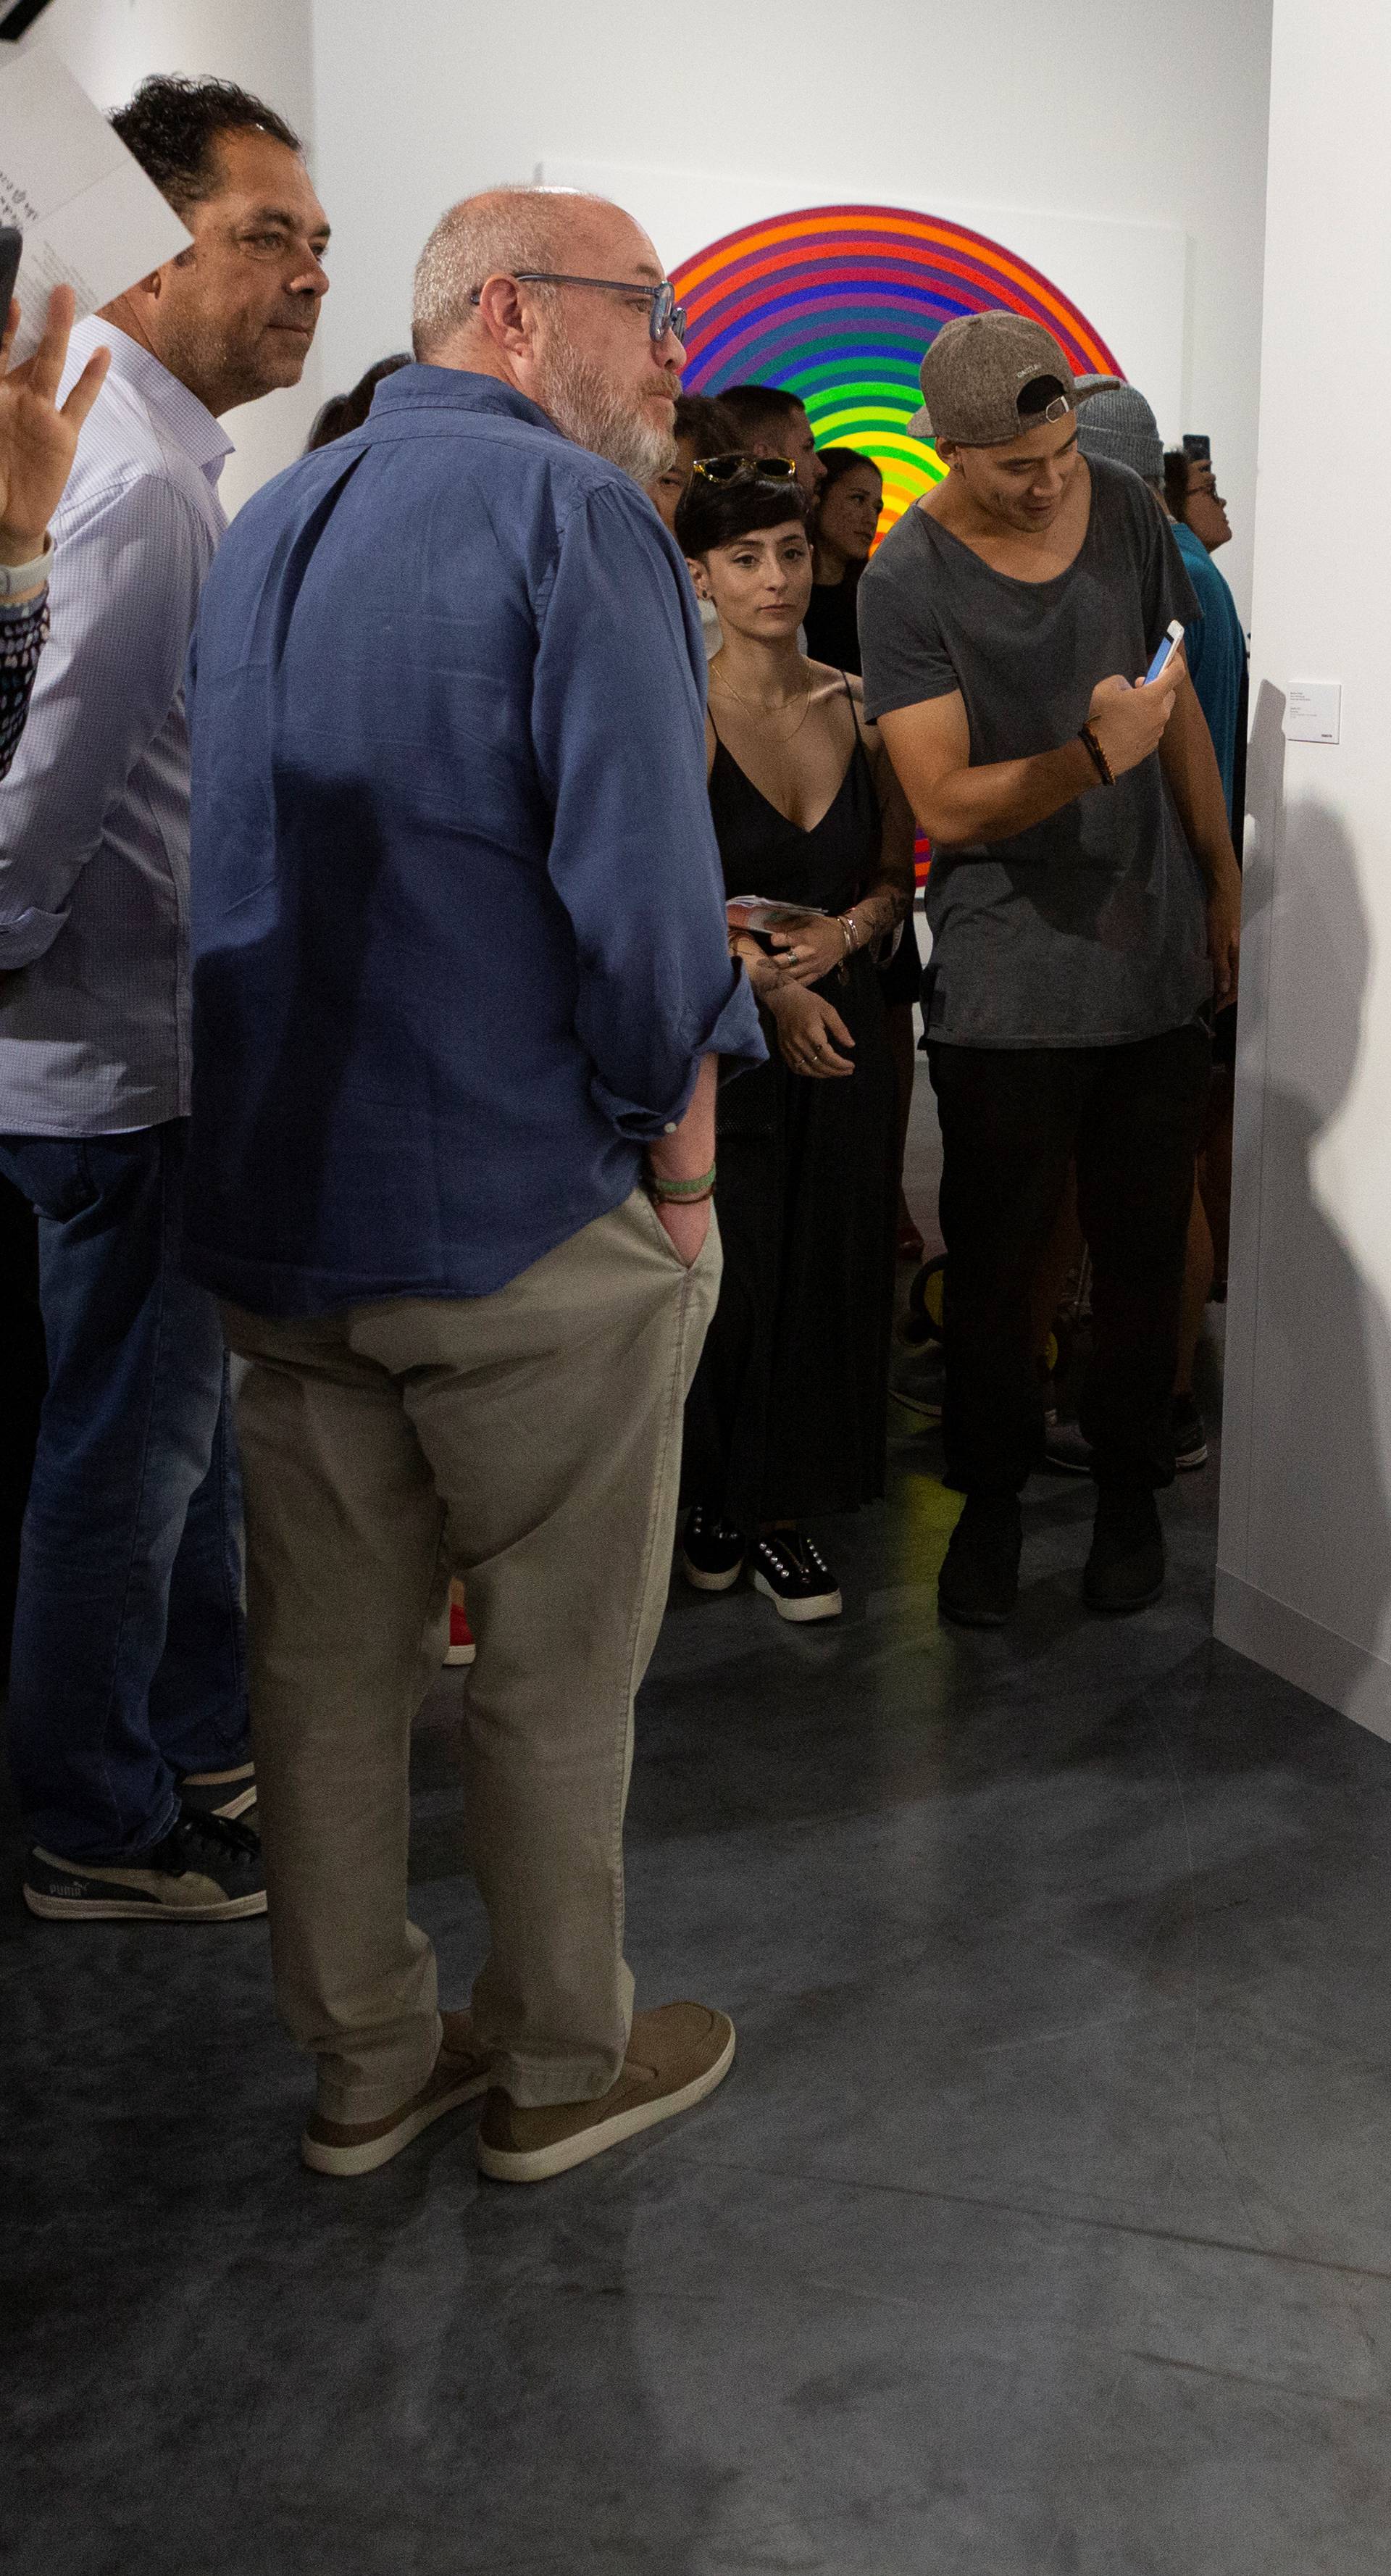 Art Basel visitors use their phones in front of the wall where the artwork 'Comedian' by the artist Maurizio Cattelan was exhibited in Miami Beach